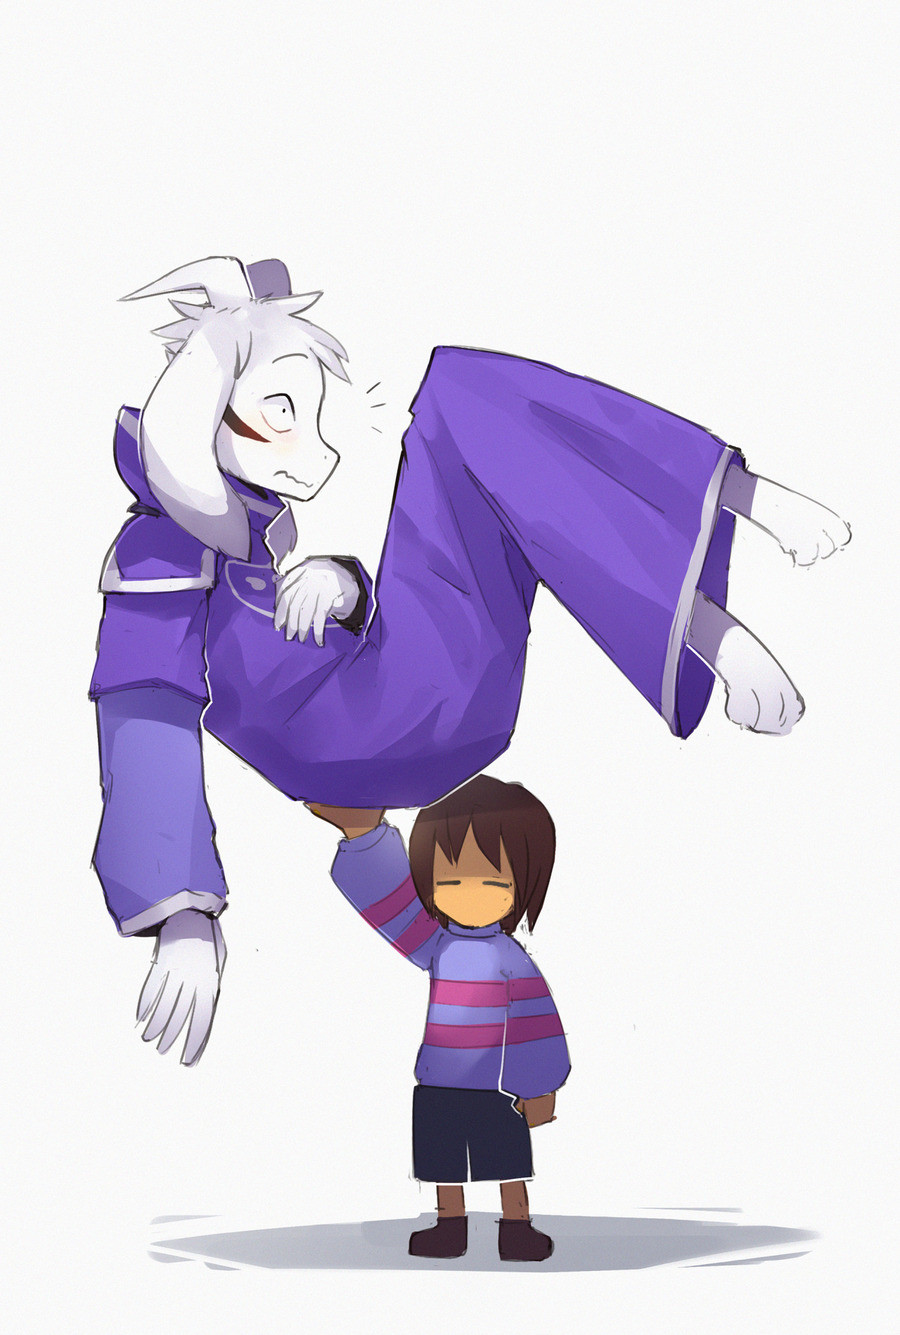 Undertale Cute stuff 7. Source for these ones at the bottom.. "Shh...